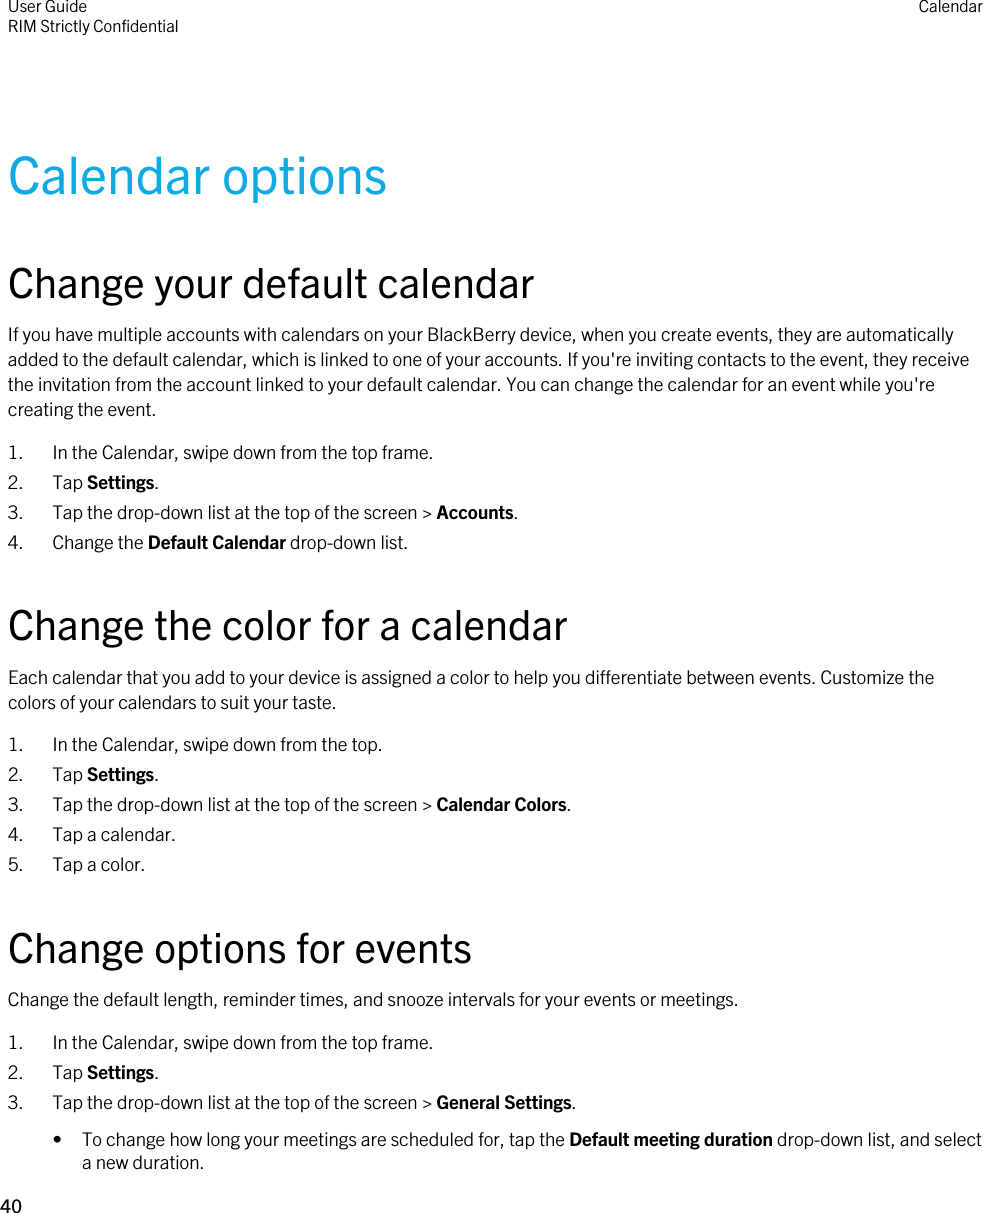 Calendar optionsChange your default calendarIf you have multiple accounts with calendars on your BlackBerry device, when you create events, they are automatically added to the default calendar, which is linked to one of your accounts. If you&apos;re inviting contacts to the event, they receive the invitation from the account linked to your default calendar. You can change the calendar for an event while you&apos;re creating the event.1. In the Calendar, swipe down from the top frame.2. Tap Settings.3. Tap the drop-down list at the top of the screen &gt; Accounts.4. Change the Default Calendar drop-down list.Change the color for a calendarEach calendar that you add to your device is assigned a color to help you differentiate between events. Customize the colors of your calendars to suit your taste.1. In the Calendar, swipe down from the top.2. Tap Settings.3. Tap the drop-down list at the top of the screen &gt; Calendar Colors.4. Tap a calendar.5. Tap a color.Change options for eventsChange the default length, reminder times, and snooze intervals for your events or meetings.1. In the Calendar, swipe down from the top frame.2. Tap Settings.3. Tap the drop-down list at the top of the screen &gt; General Settings.• To change how long your meetings are scheduled for, tap the Default meeting duration drop-down list, and select a new duration.User GuideRIM Strictly ConfidentialCalendar40 